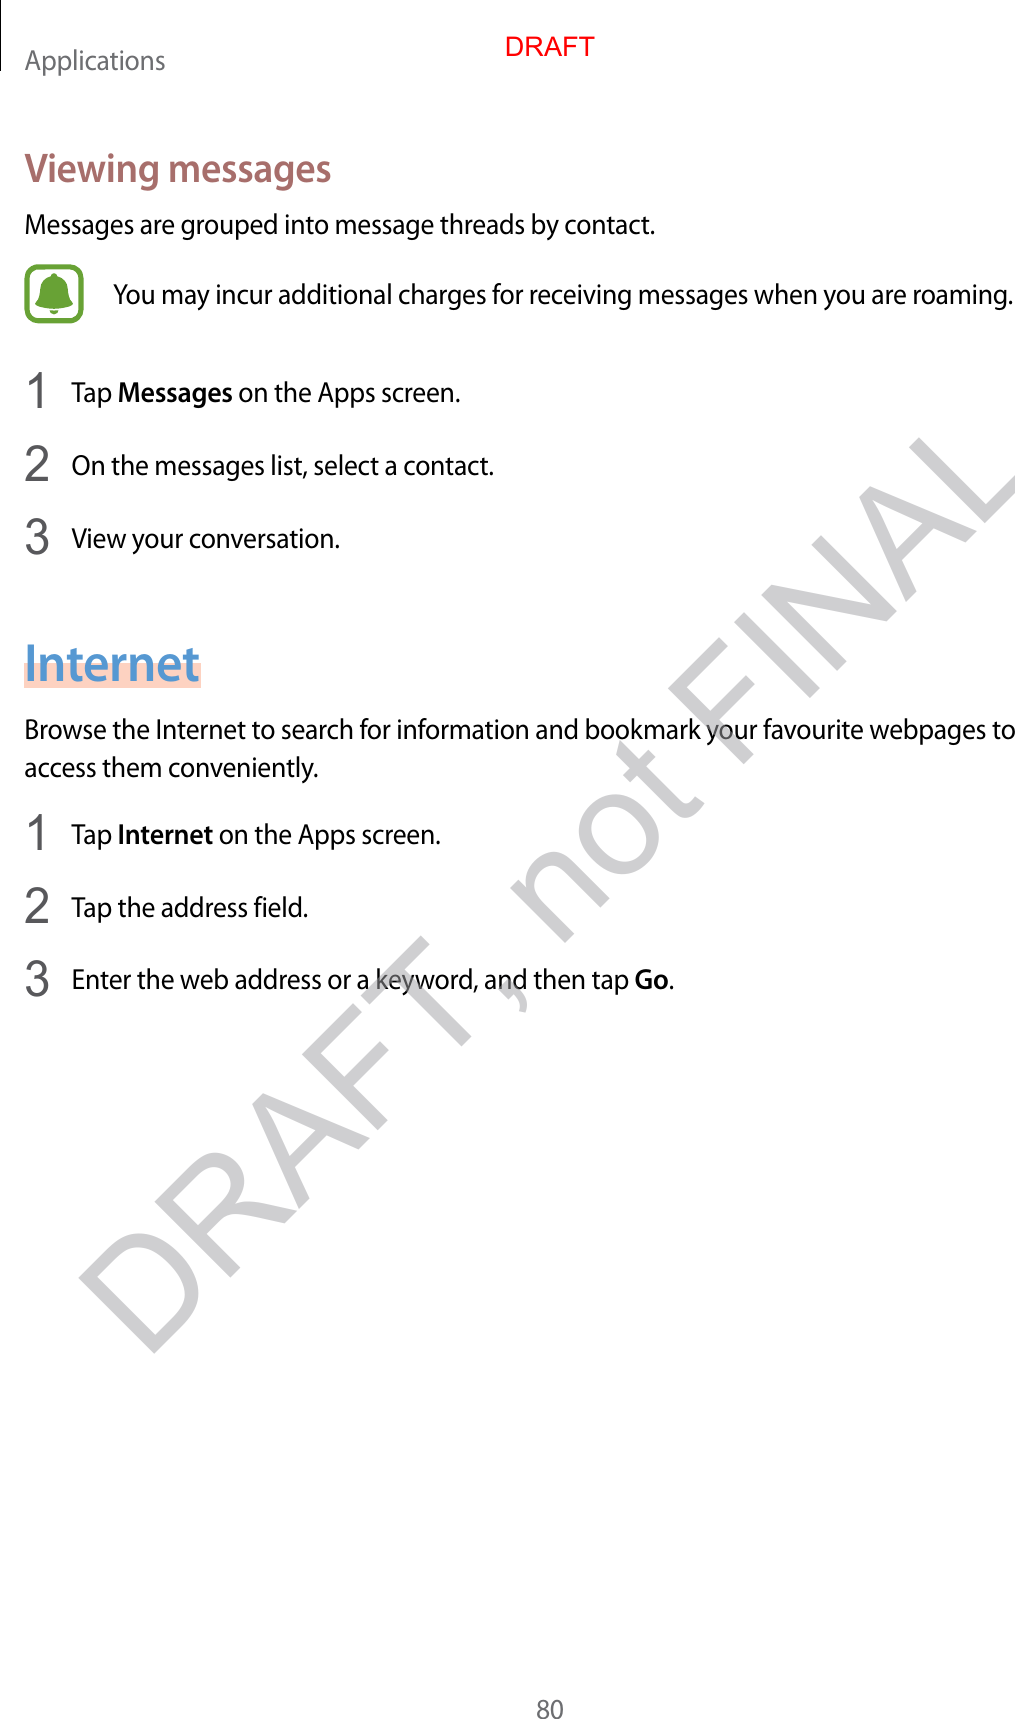 Applications80V ie wing messagesMessages are gr ouped int o message thr eads by c ontact.You may incur additional charges for r ec eiving messages when y ou ar e r oaming .1  Tap Messages on the Apps screen.2  On the messages list, select a contact.3  View y our c on v ersa tion.InternetBrow se the Internet to sear ch for information and bookmark your fa v ourite w ebpages t o access them c on v eniently.1  Tap Internet on the Apps screen.2  Tap the address field.3  Enter the w eb addr ess or a keywor d , and then tap Go.DRAFT, not FINALDRAFT